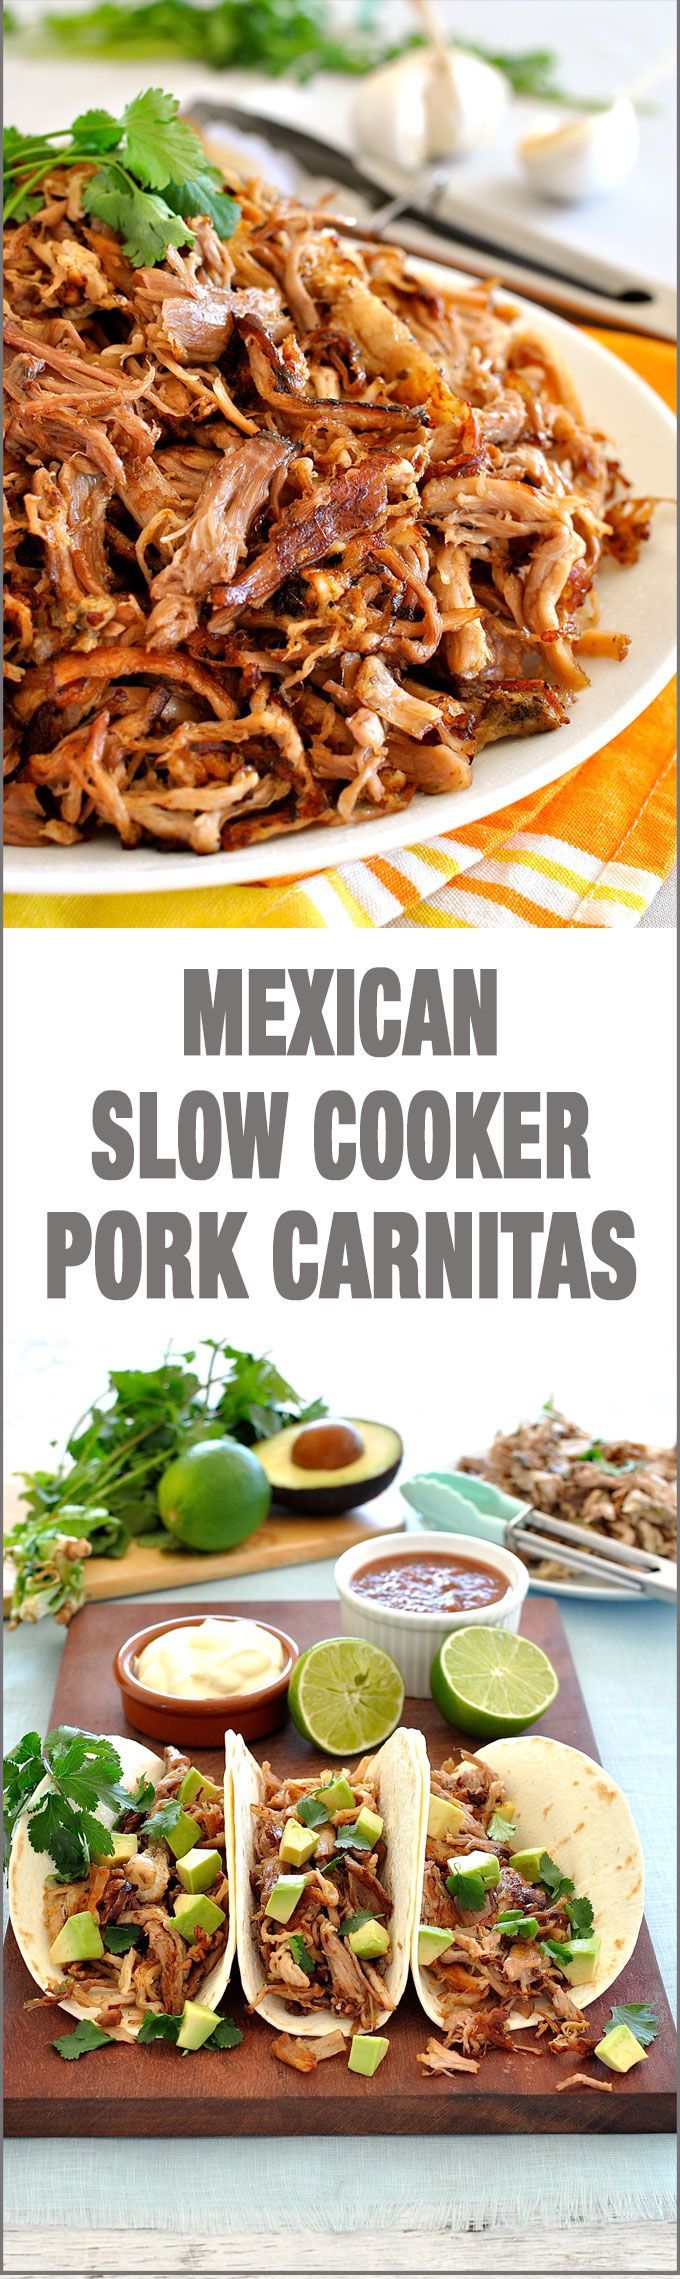 Mexican Slow Cooker Pork Carnitas – Super easy slow cooker Pork Carnitas (Mexican Pulled Pork) and the BEST way to get the brown